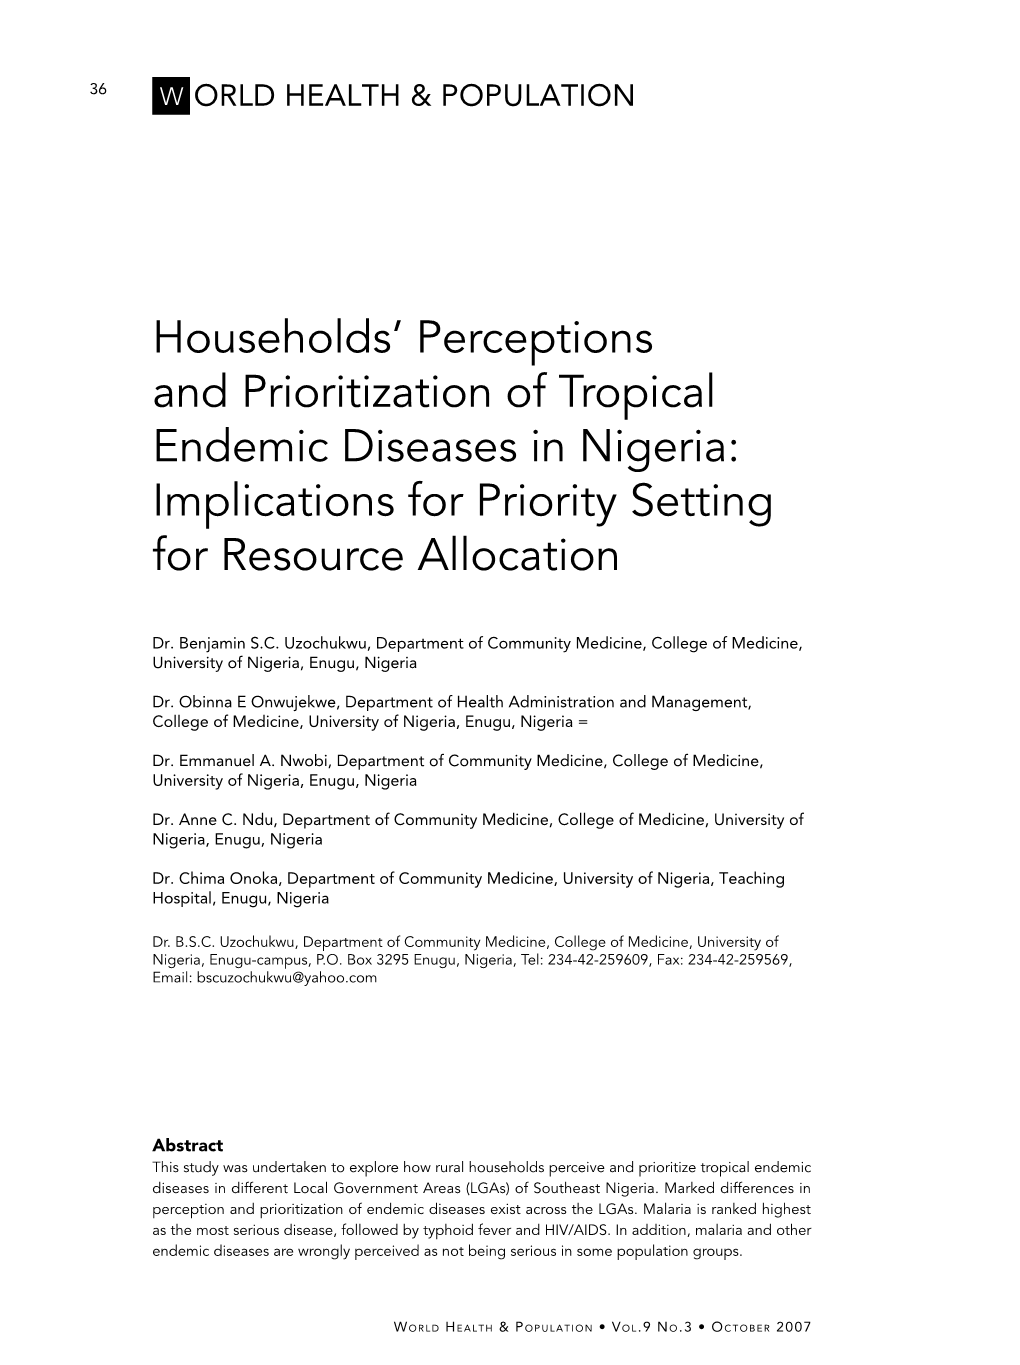 Households' Perceptions and Prioritization of Tropical Endemic Diseases in Nigeria: Implications for Priority Setting for Reso